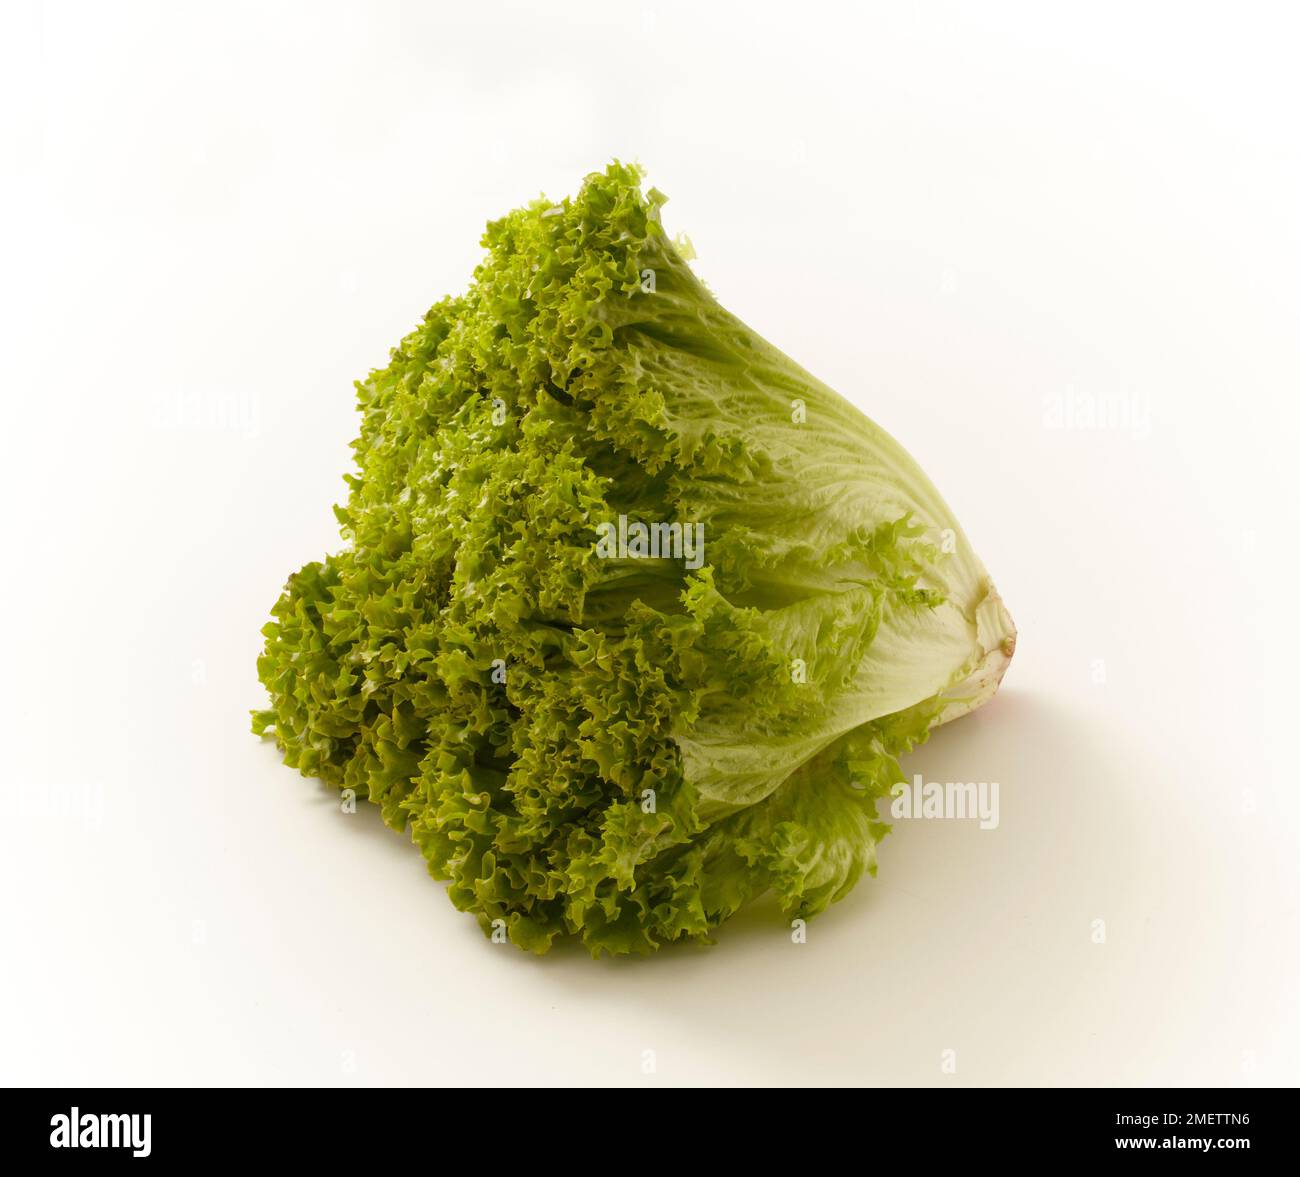 Curly leaf lettuce Stock Photo